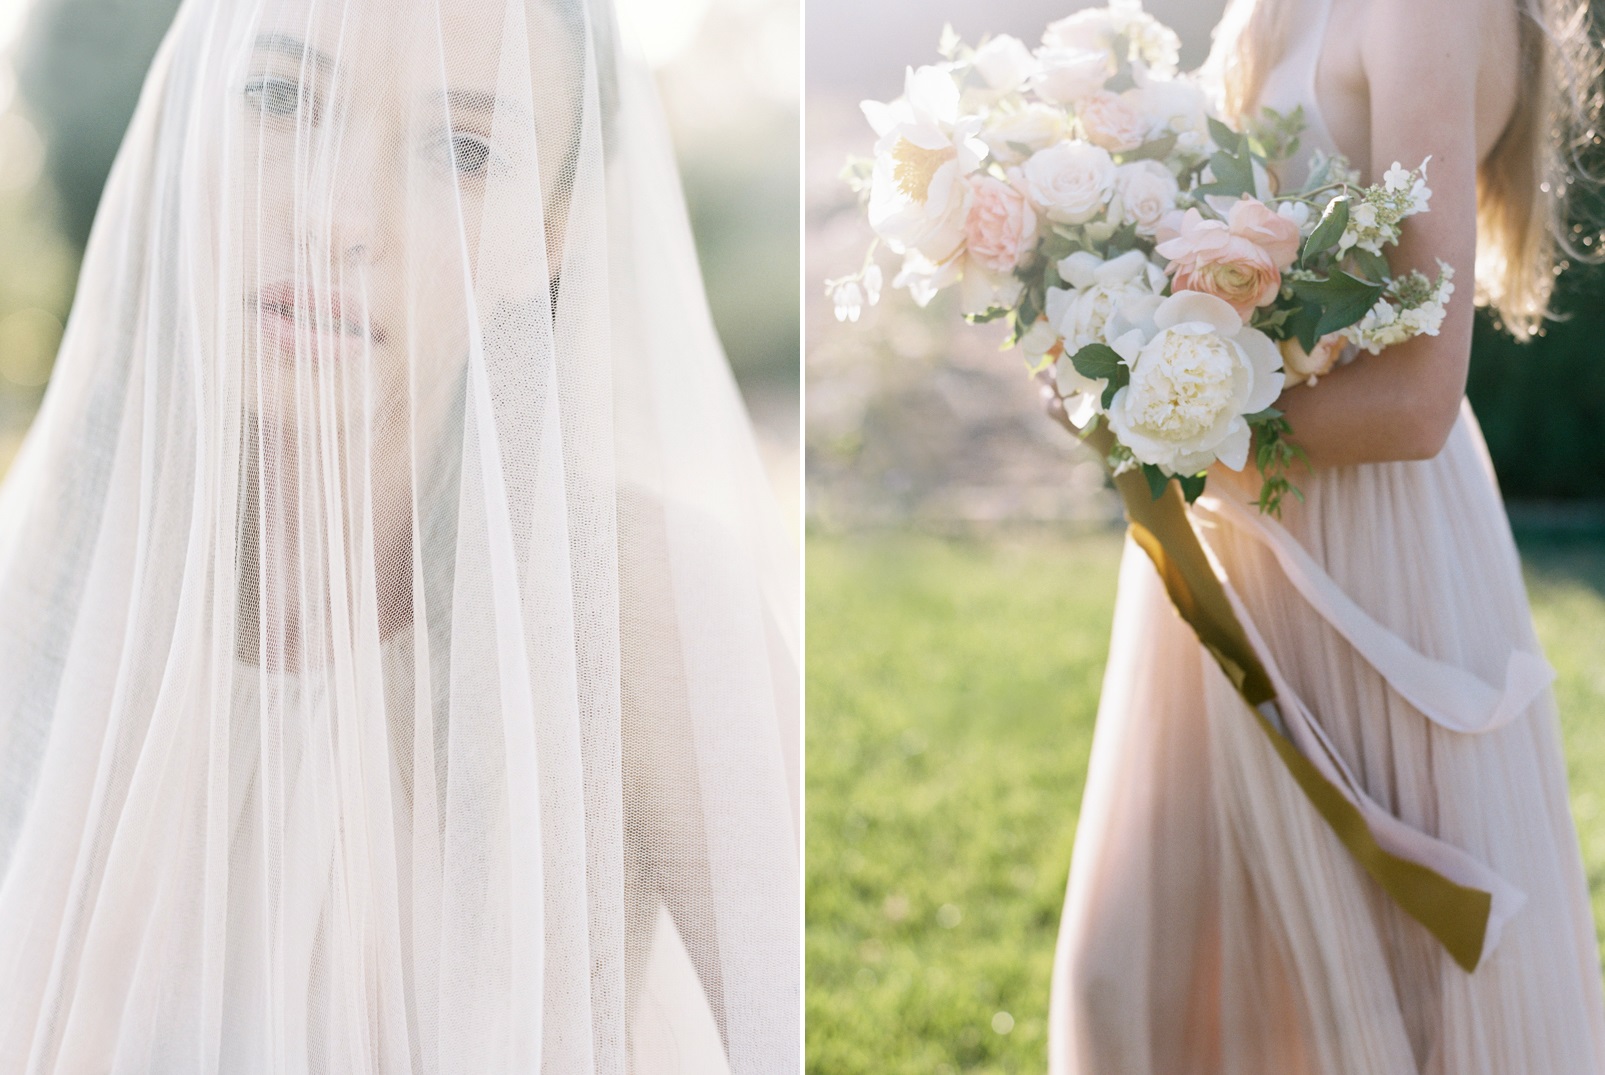 Bride & Bouquet - Dreamy Garden Wedding Inspiration with a Hint of Provence